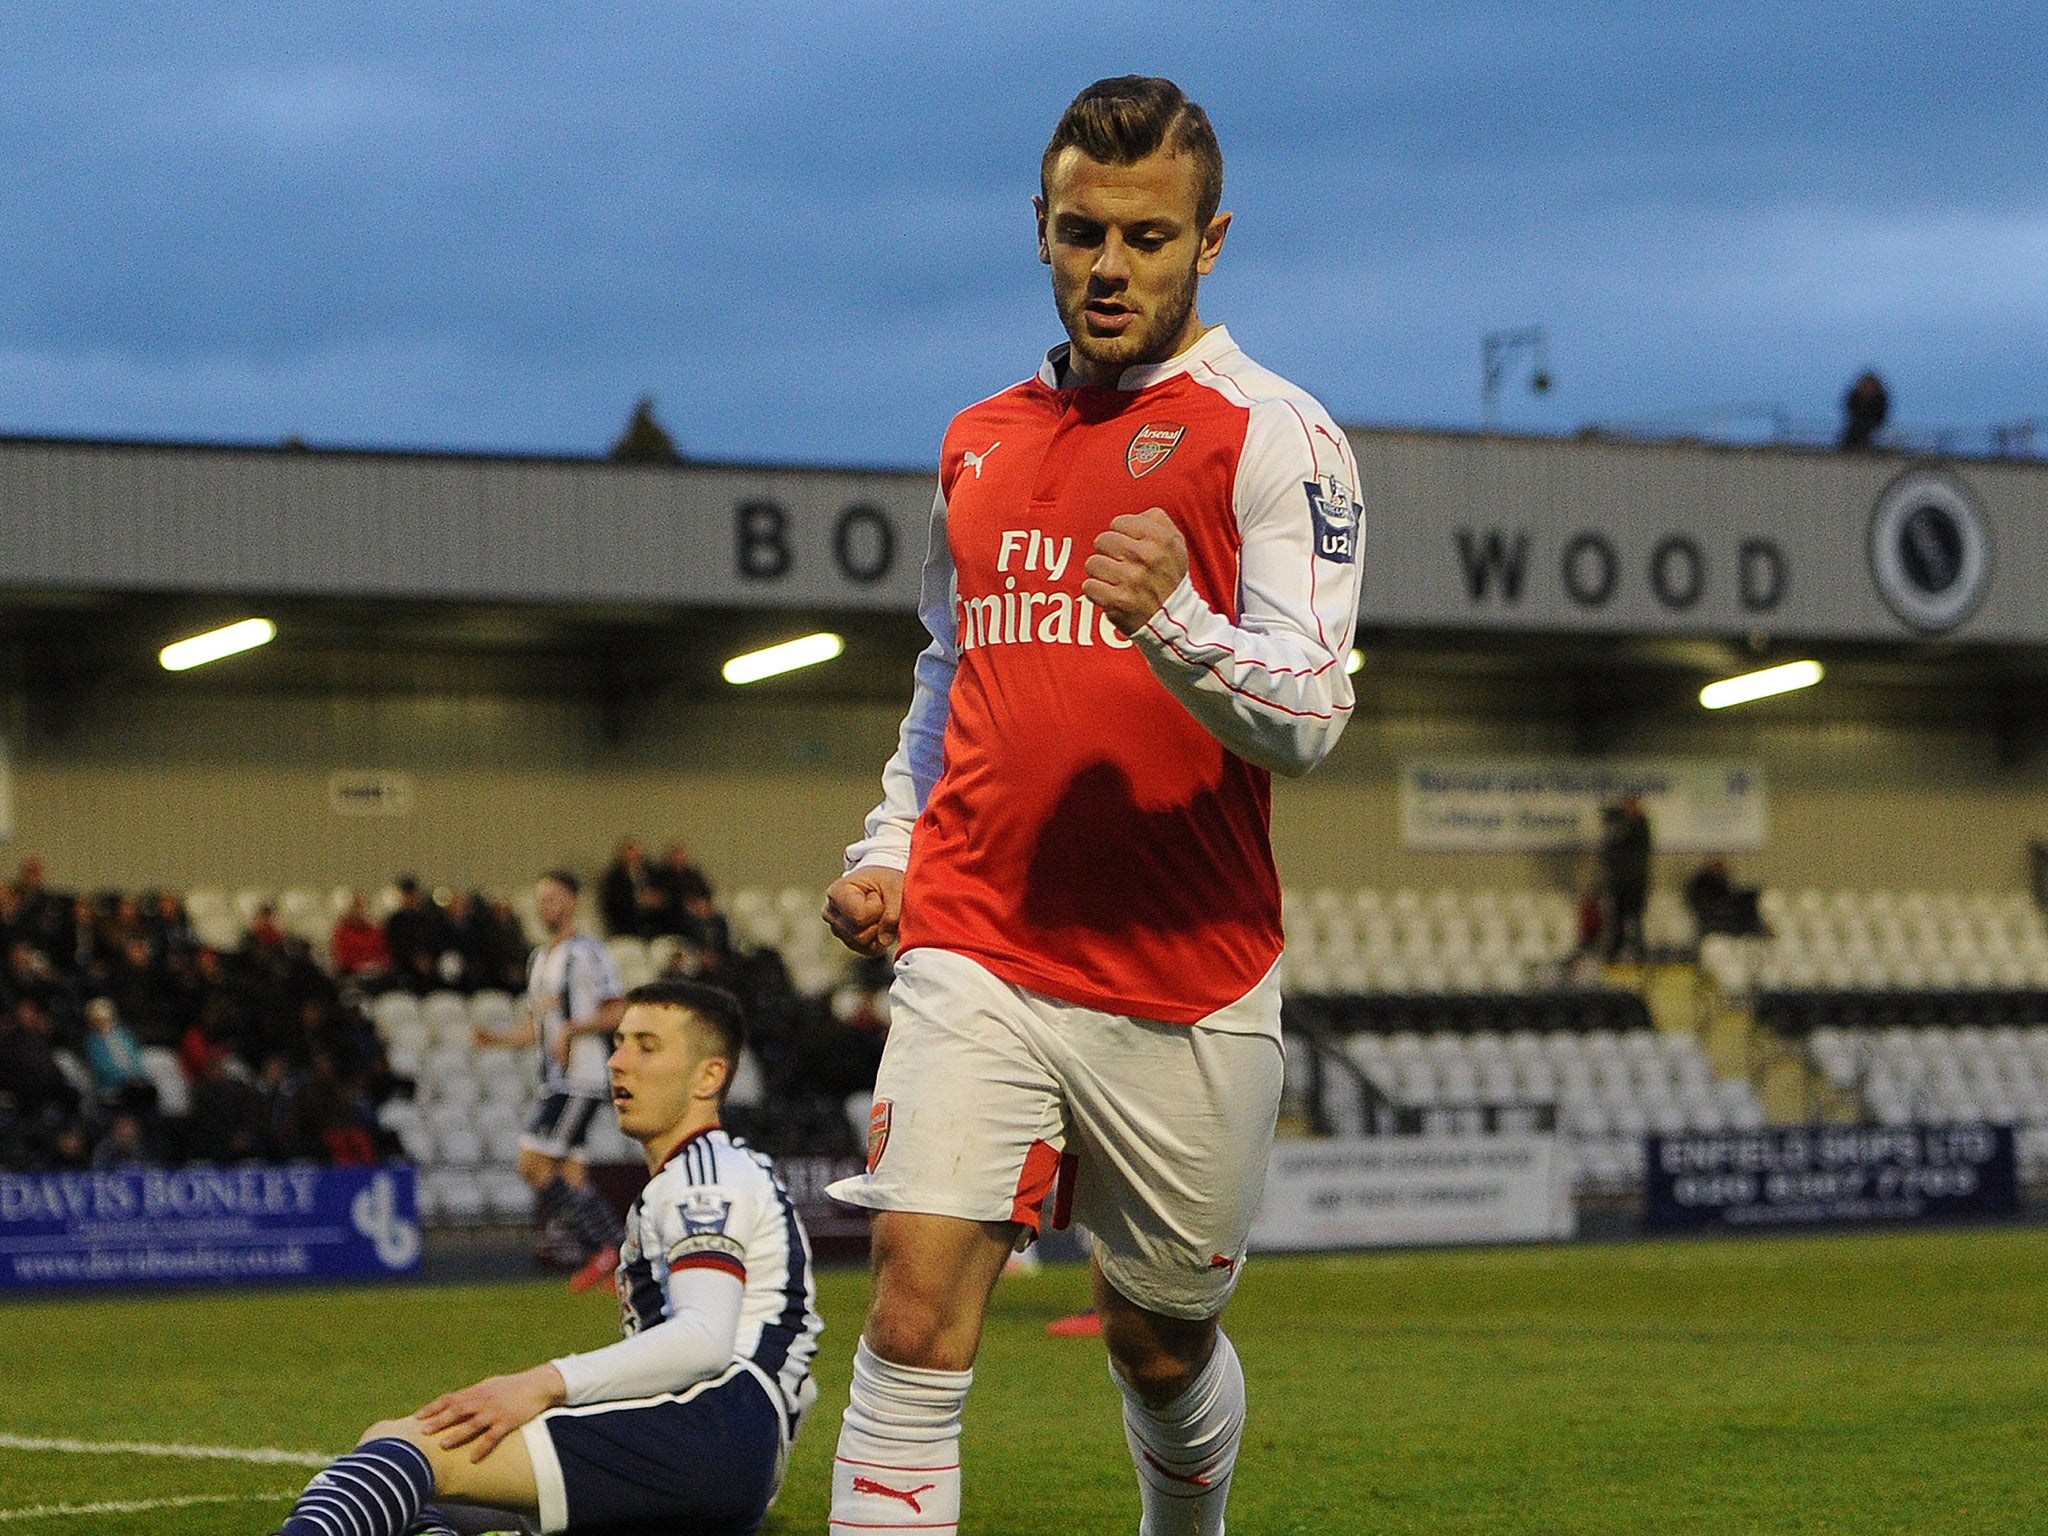 Wilshere recovered to score in the second half